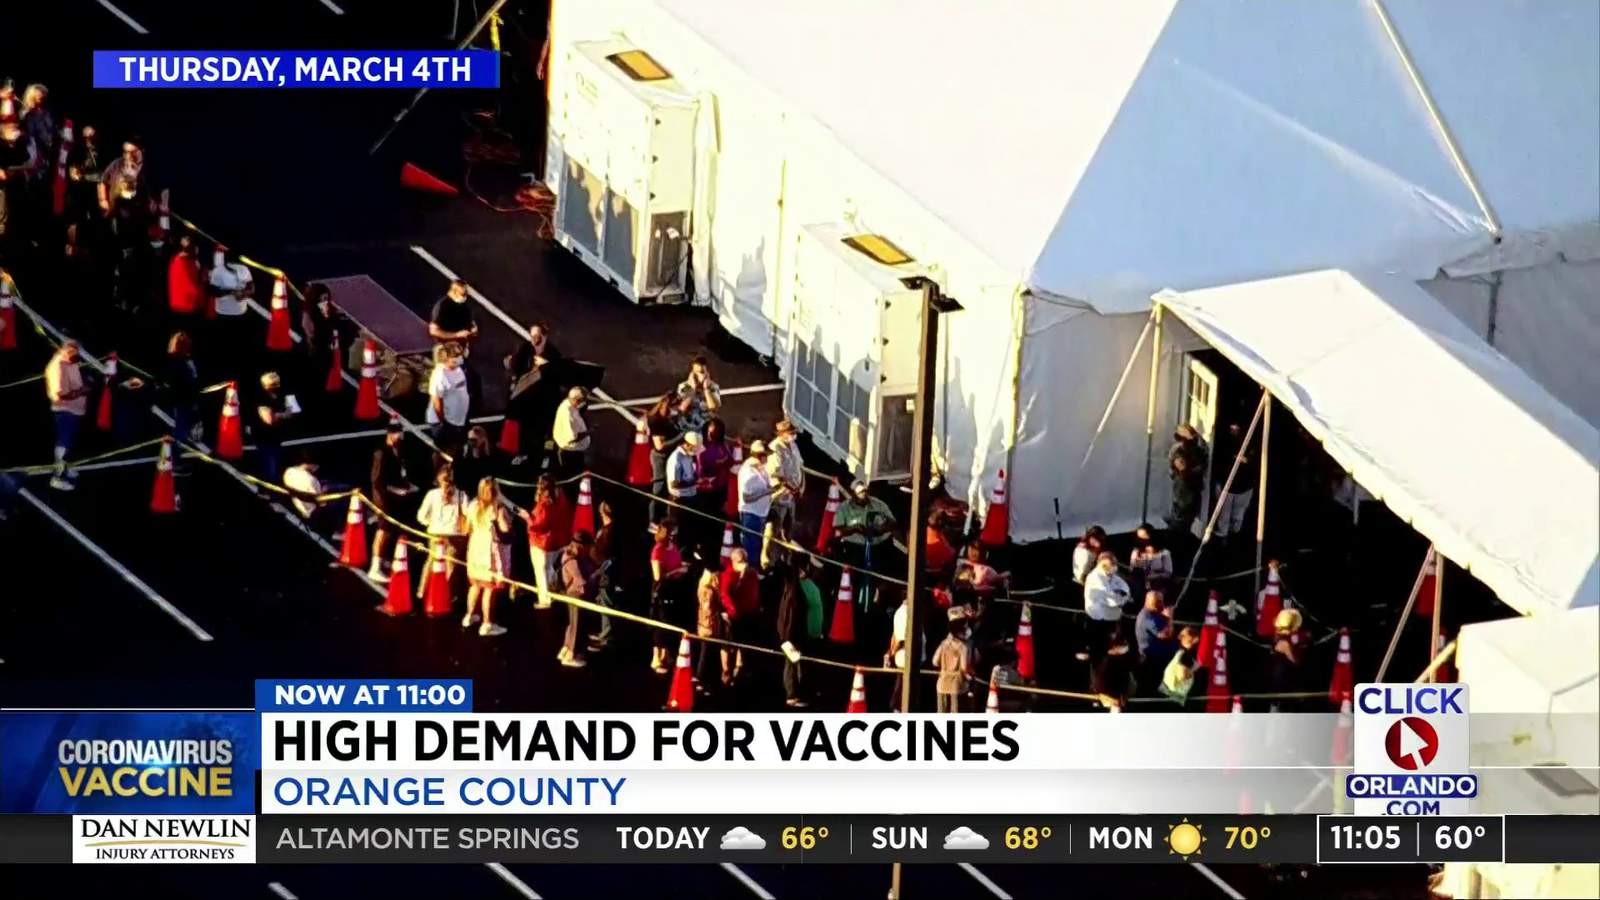 Residents pleased with relatively smooth process at FEMA vaccine site